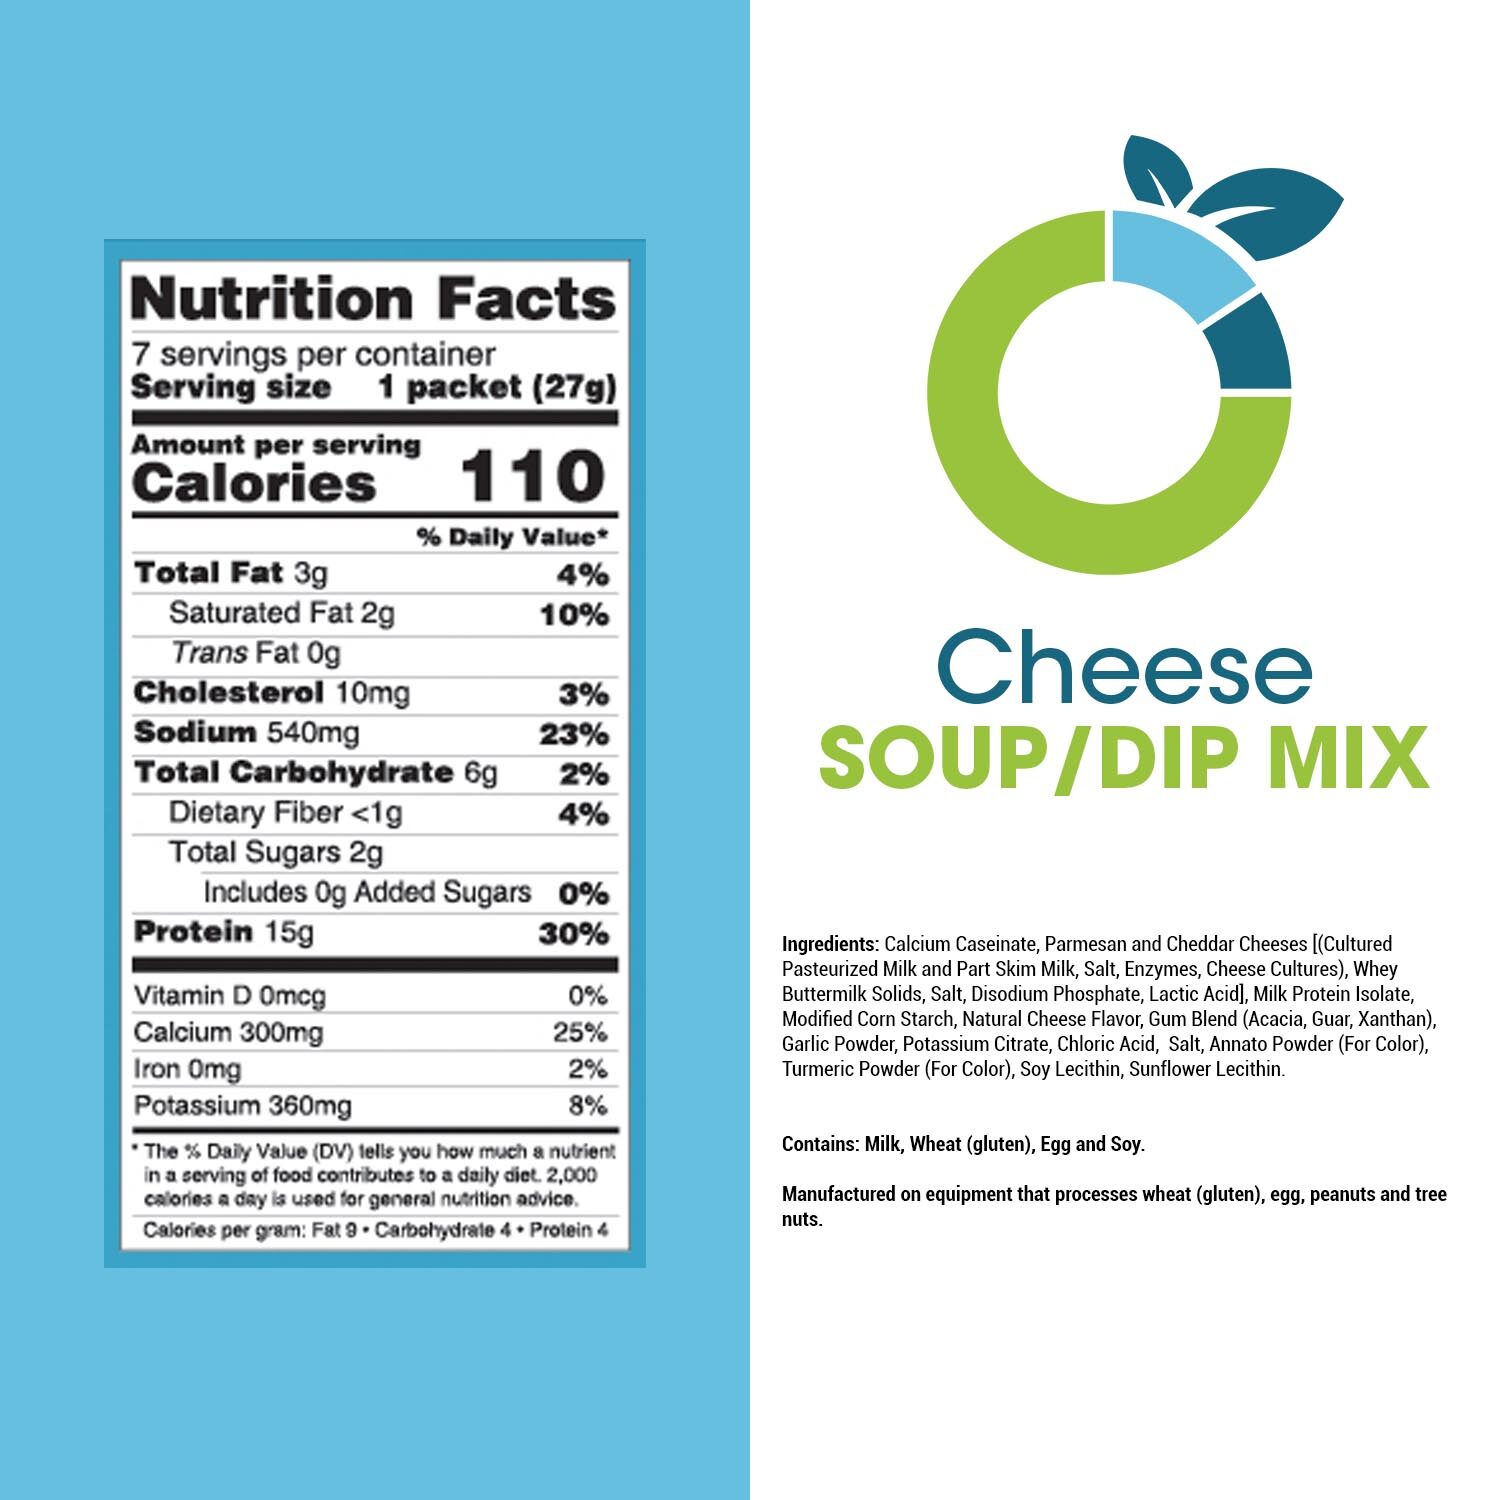 Cheese-Soup-Dip-Mix-Panel